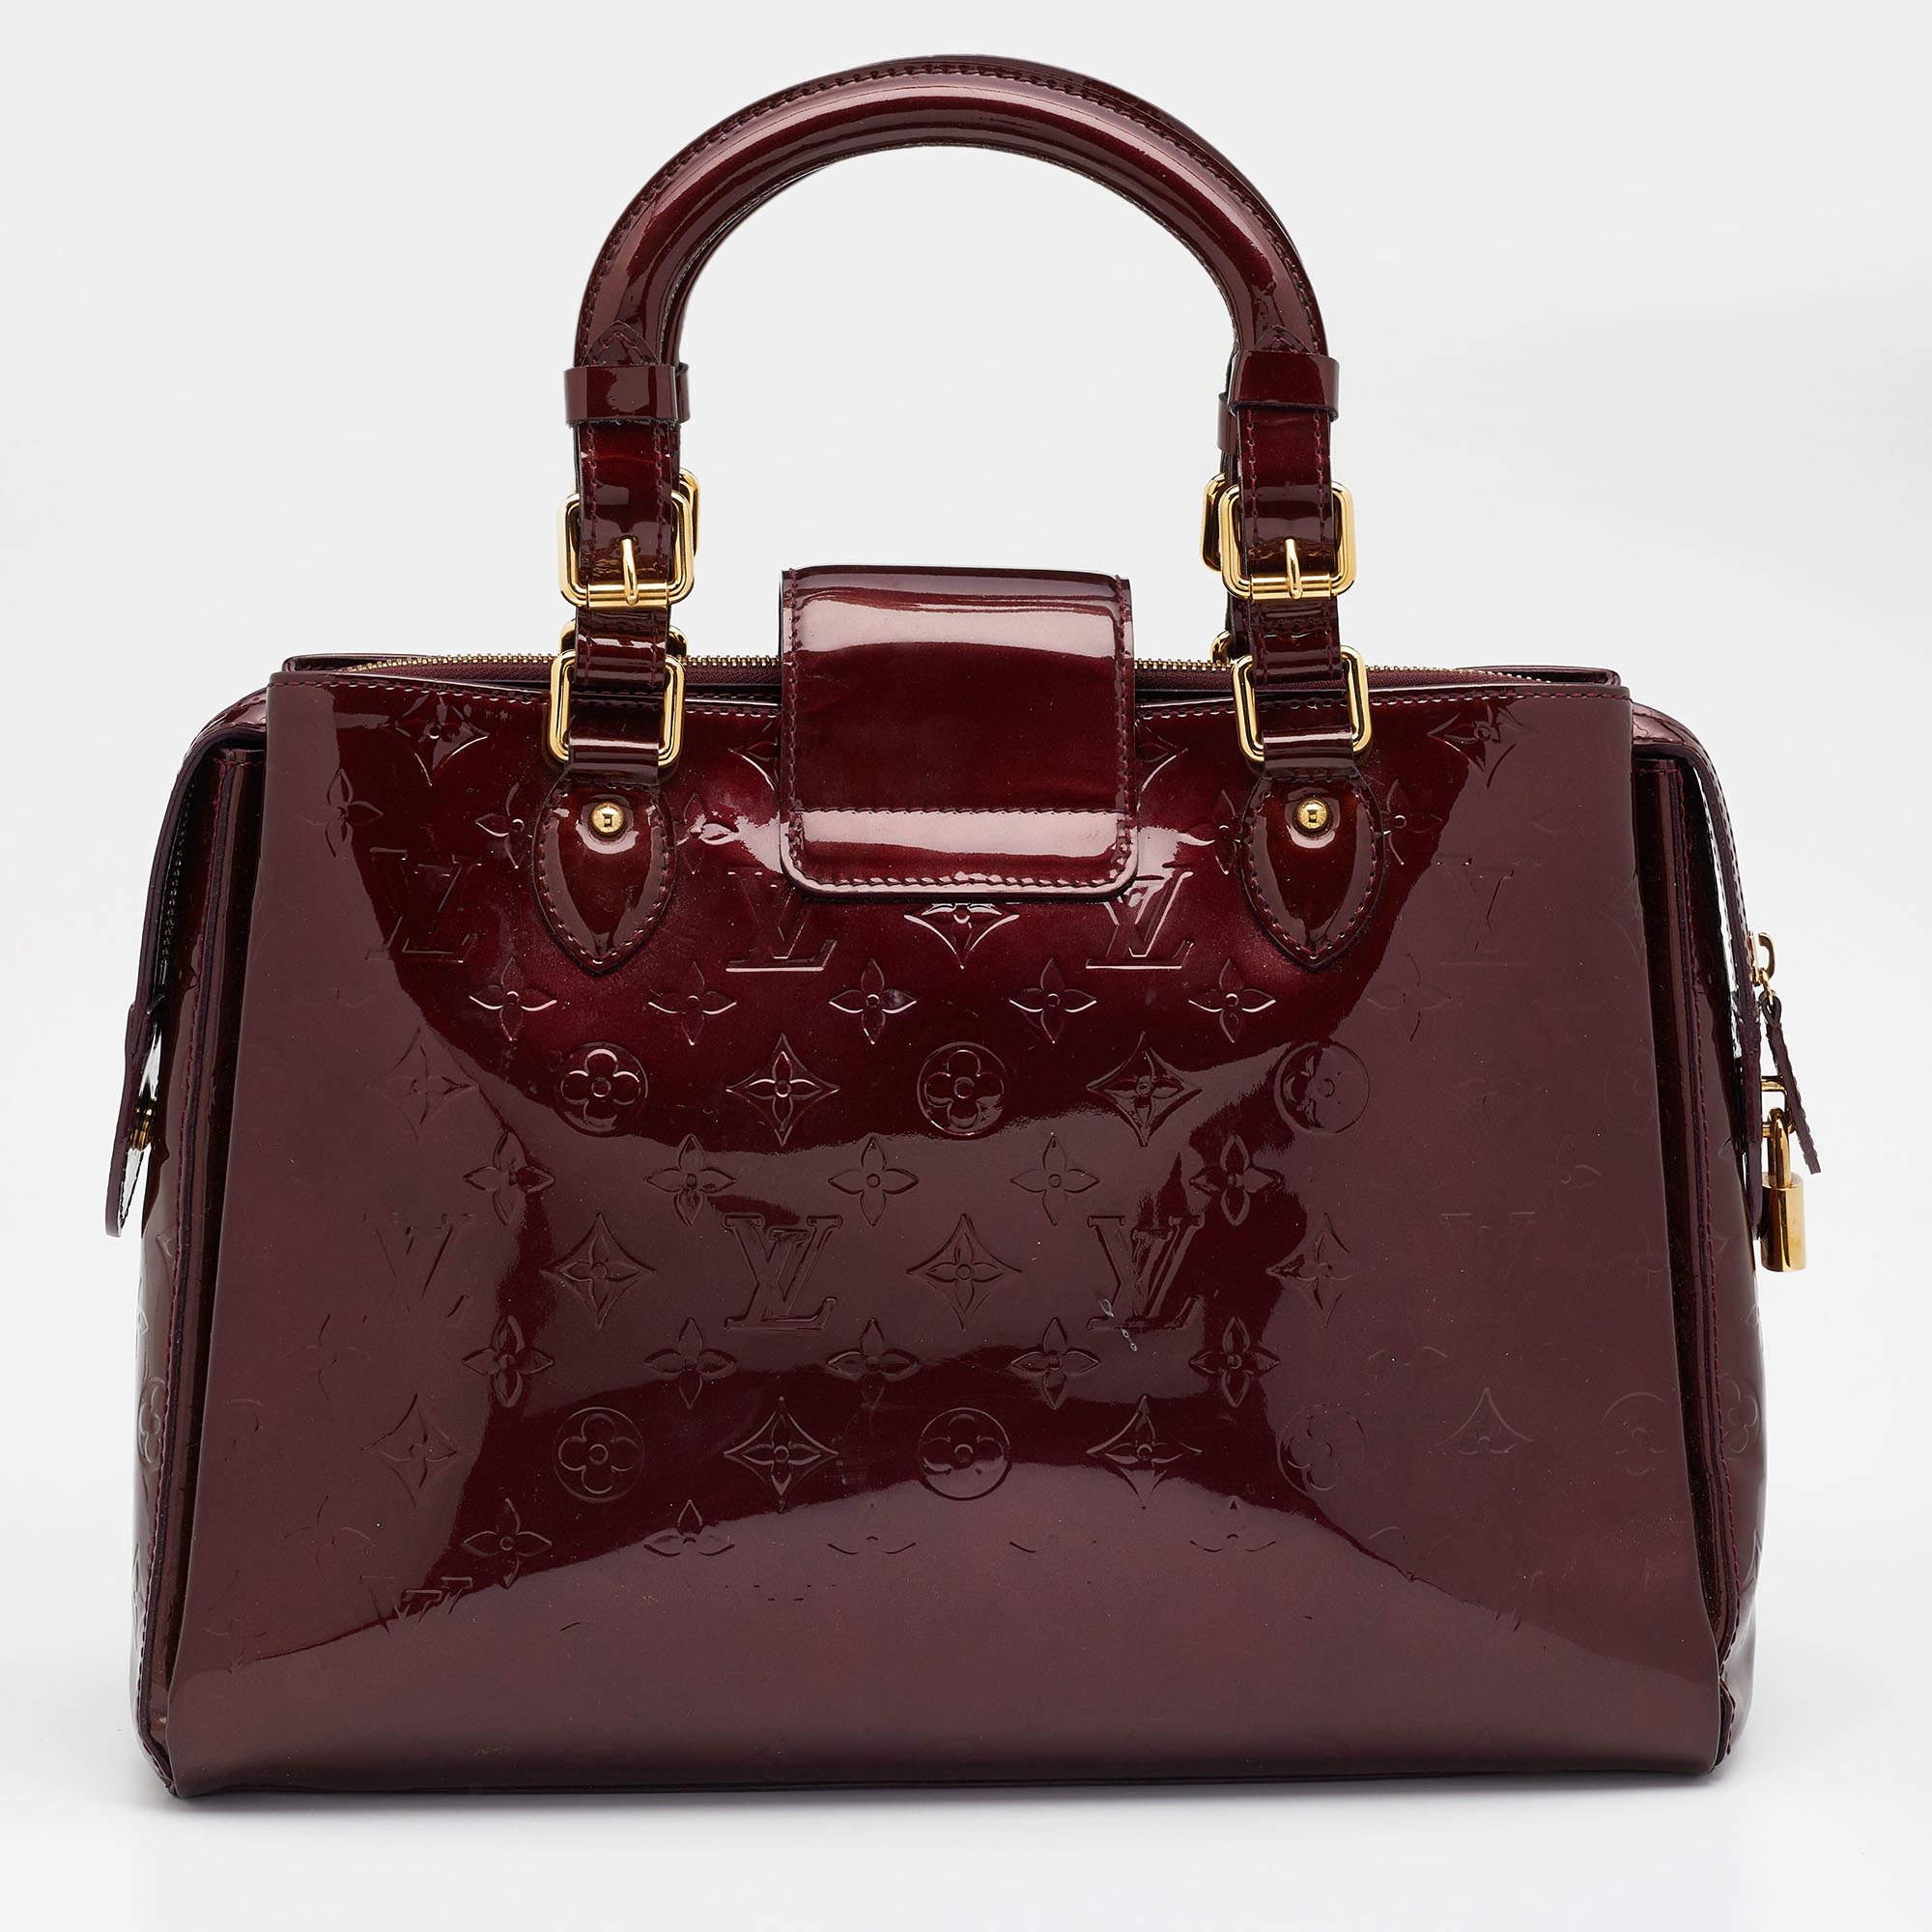 Looking for an everyday bag with just the right coat of luxury? Your quest ends here with this Melrose Avenue from Louis Vuitton. Wonderfully crafted from Monogram Vernis, the bag brings a lovely shade, two top handles, and a spacious fabric